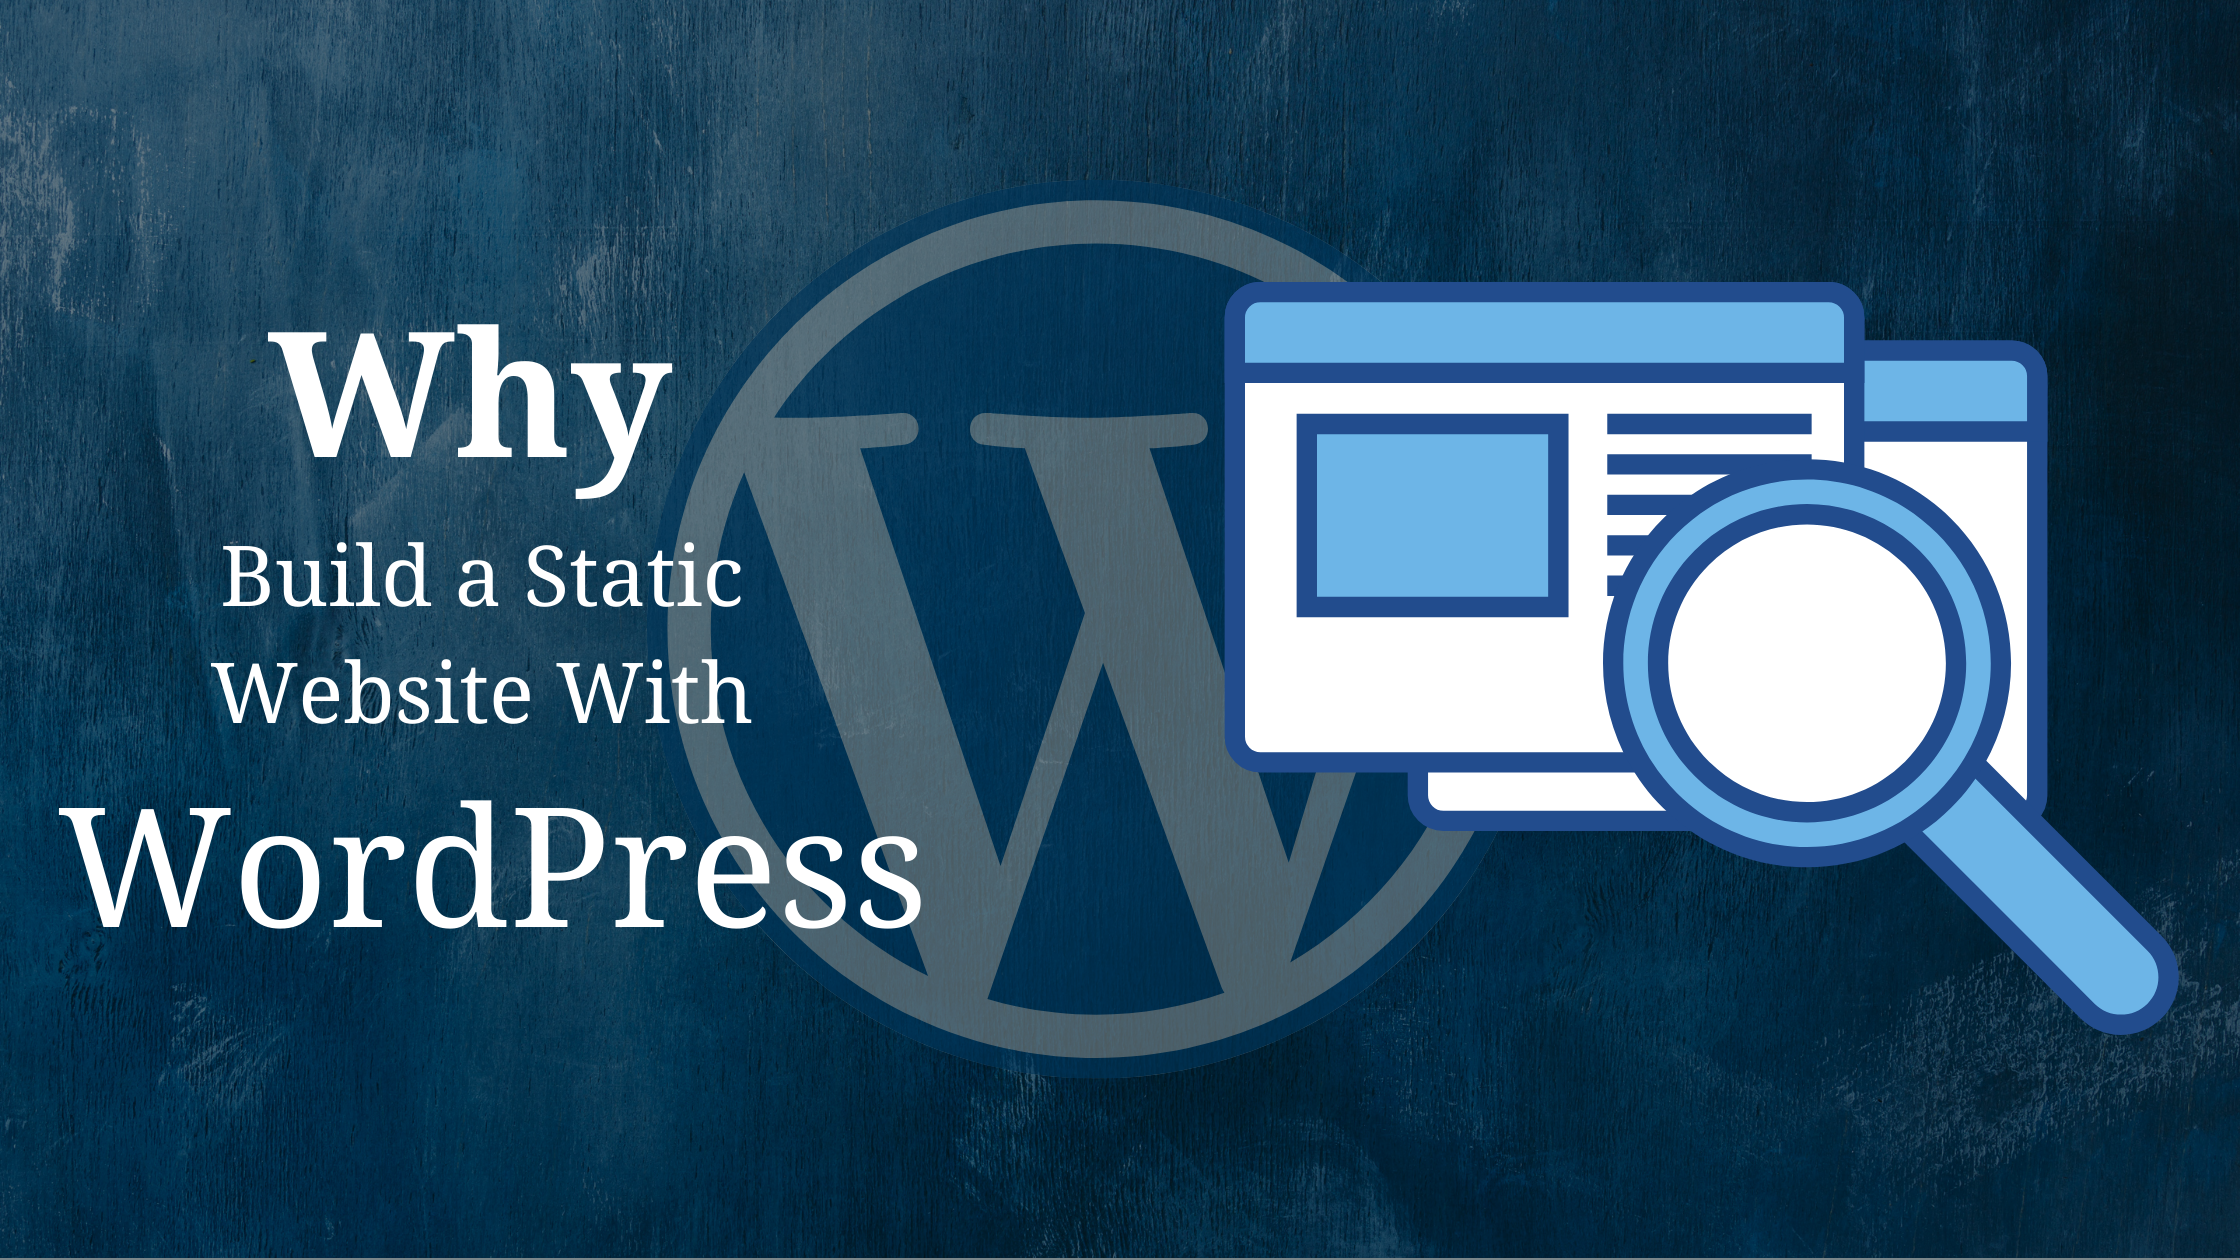 Why Build a Static Website With WordPress